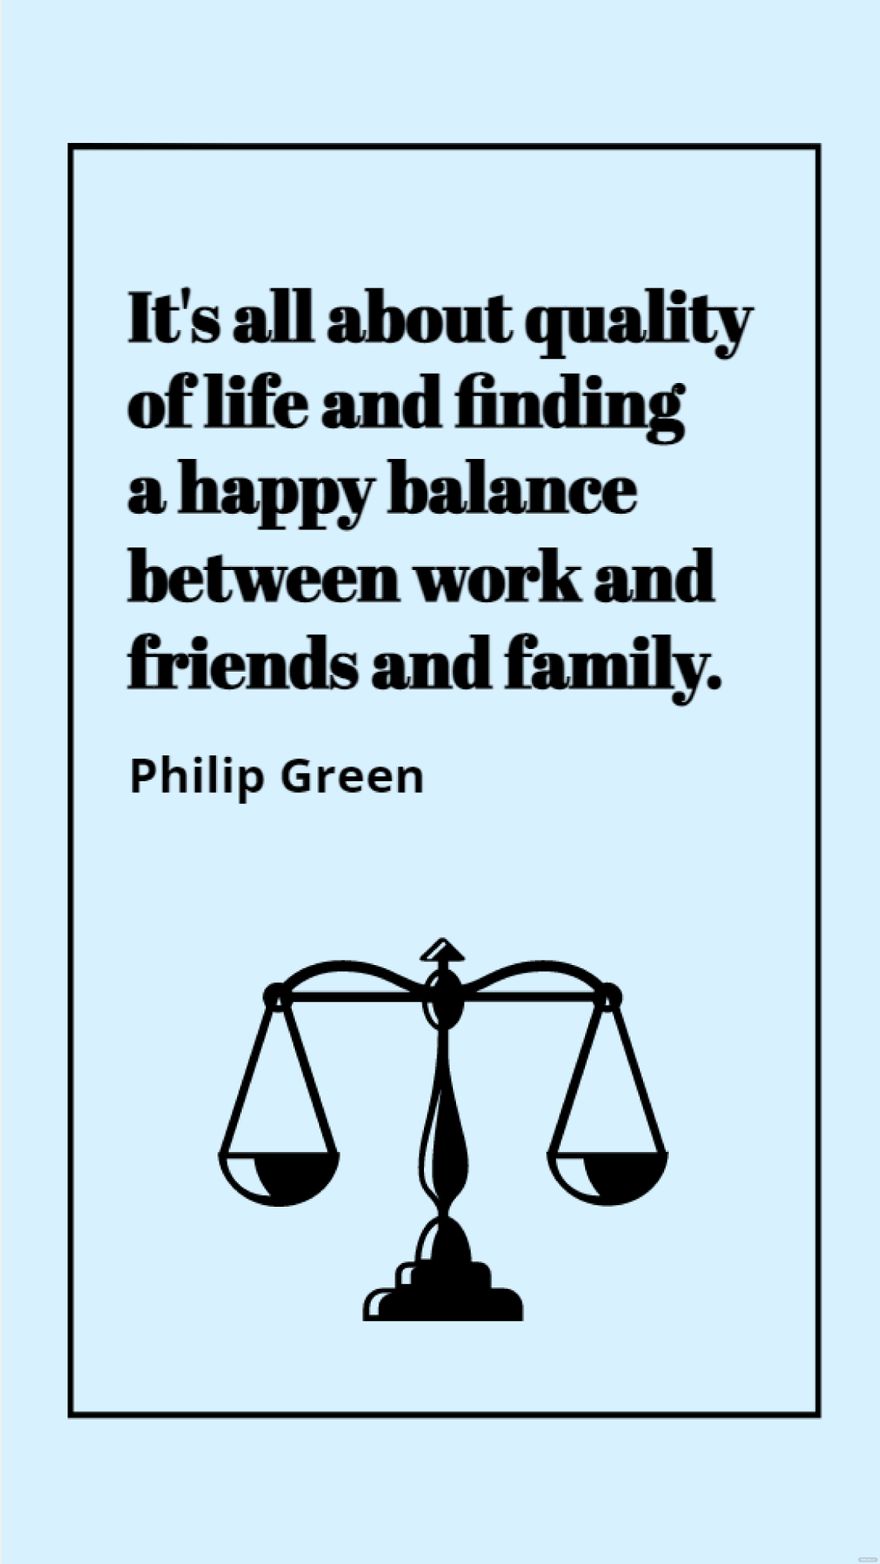 Philip Green - It's all about quality of life and finding a happy balance between work and friends and family.